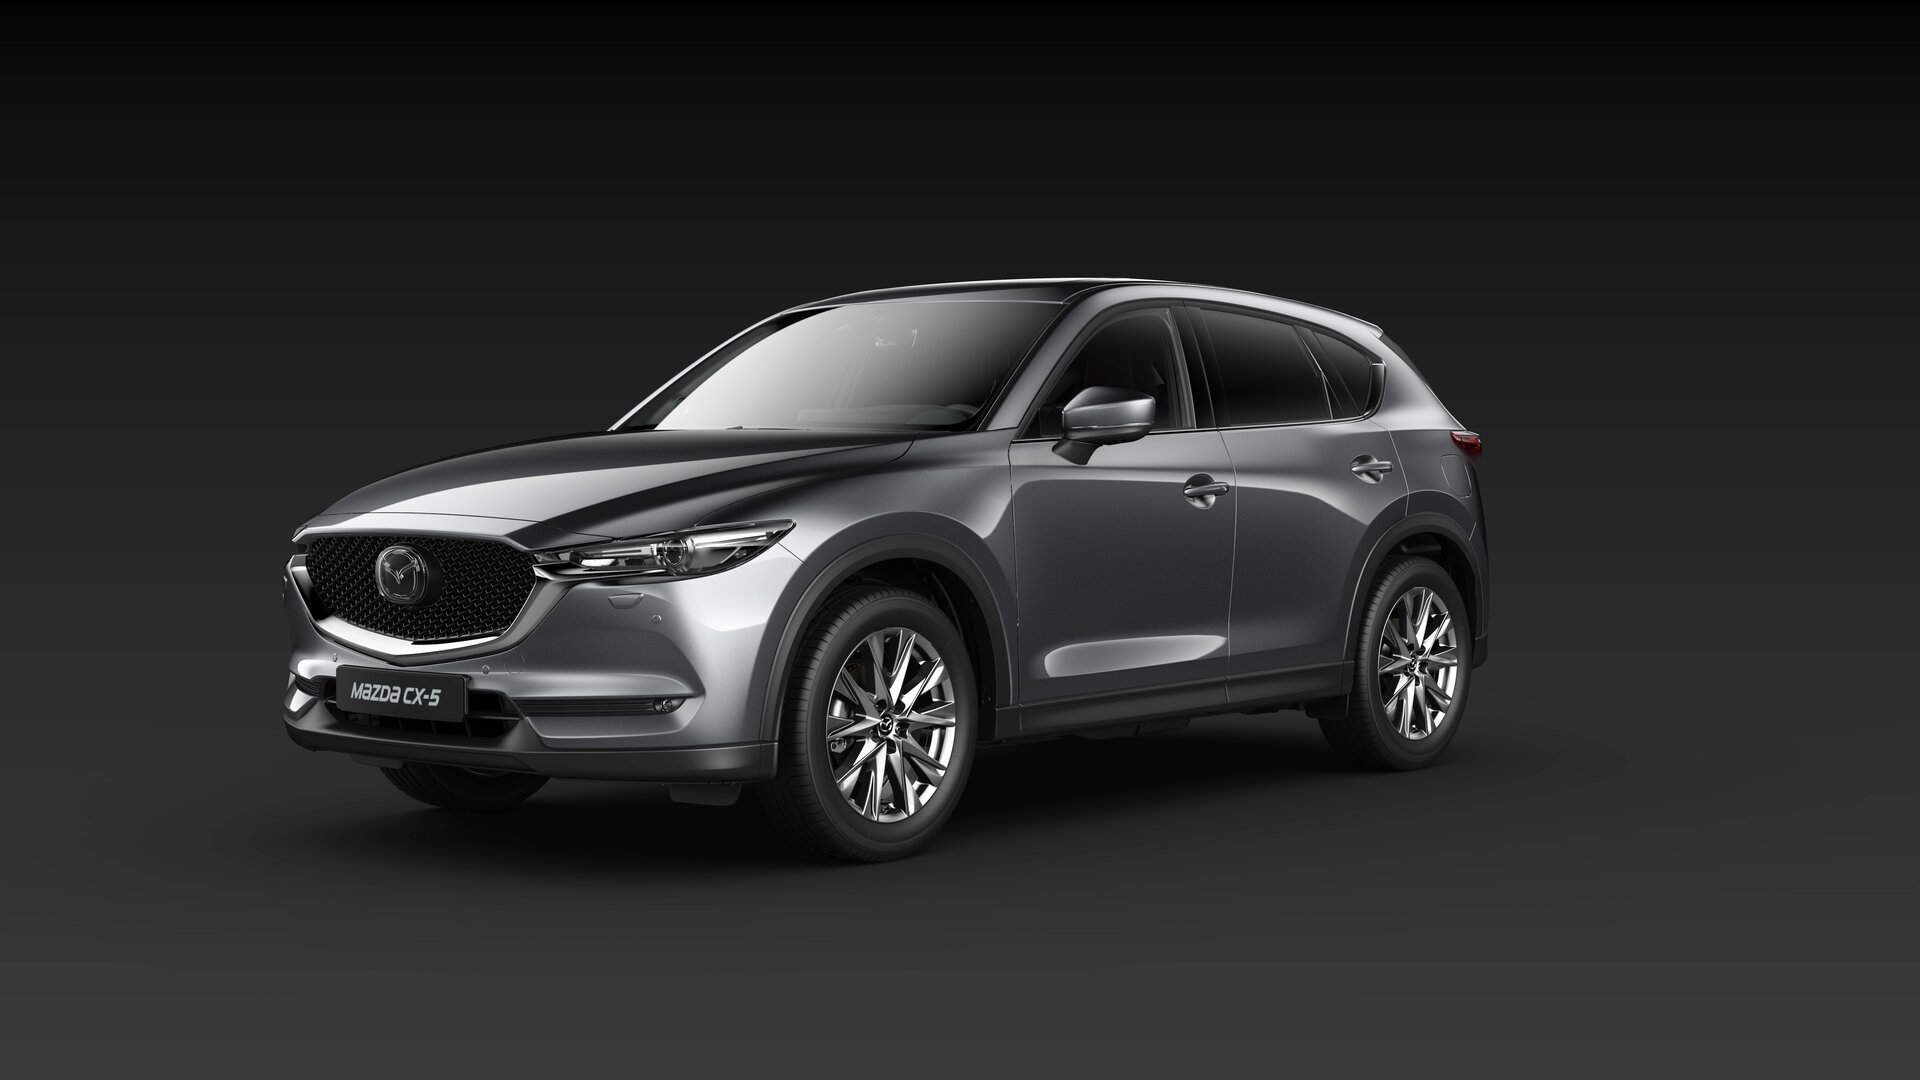 36 Top Pictures 2019 Mazda Cx 5 Sport : 2019 Mazda CX-5 Signature Review: A Sports Car In Disguise